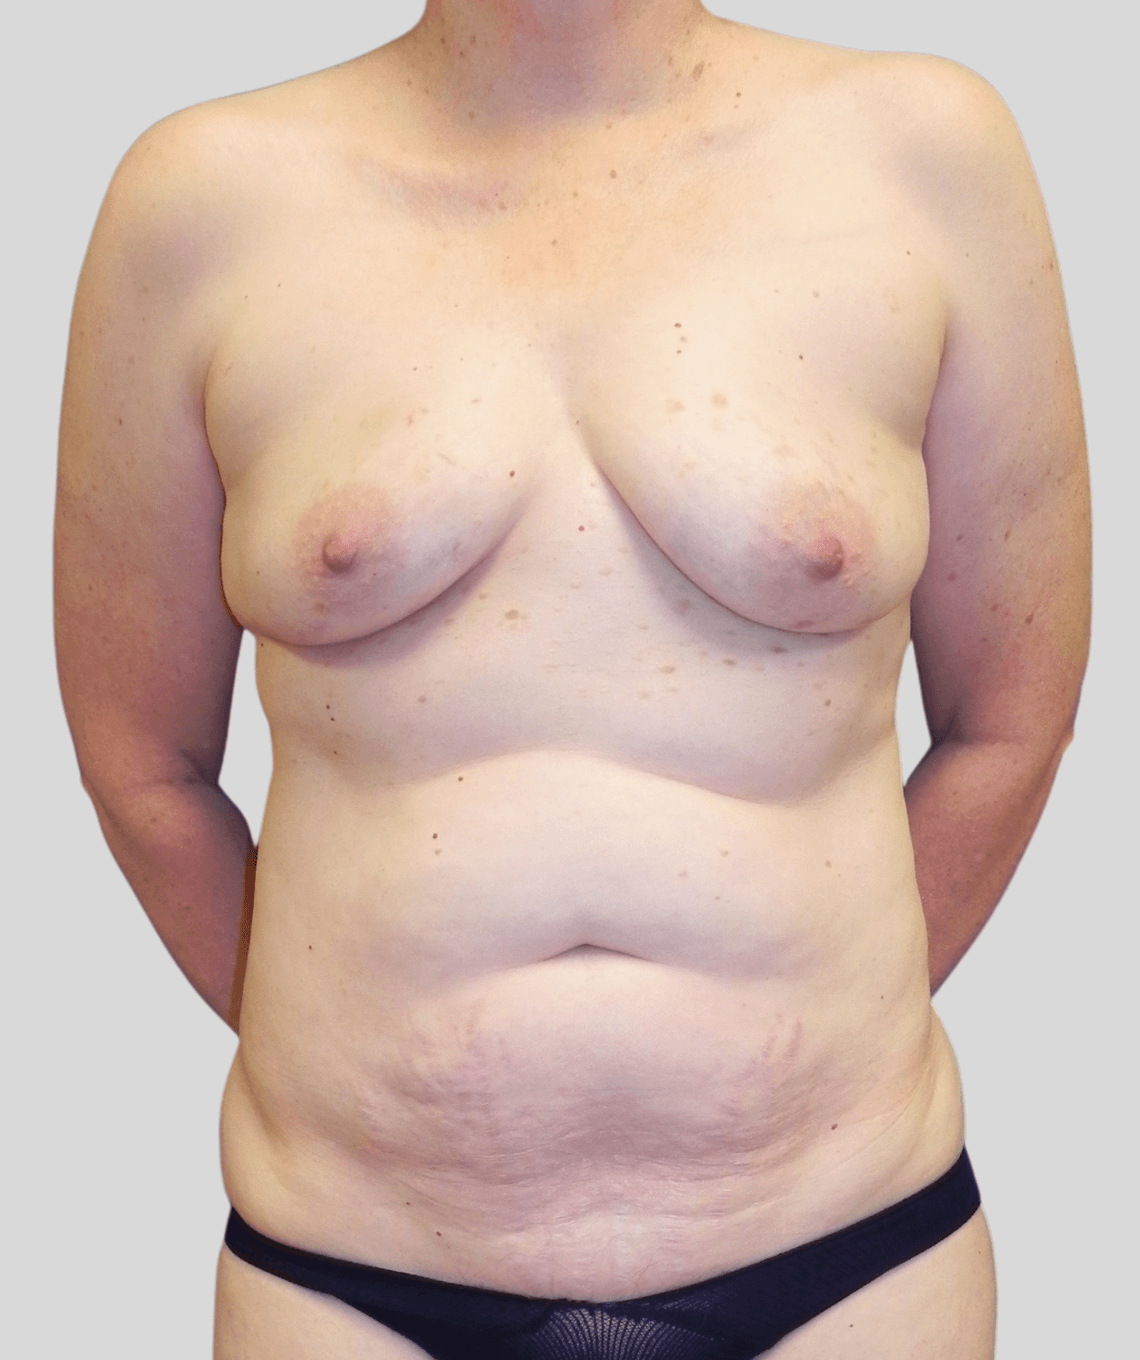 diep flap- before and after photos - before - prma plastic surgery - case 10